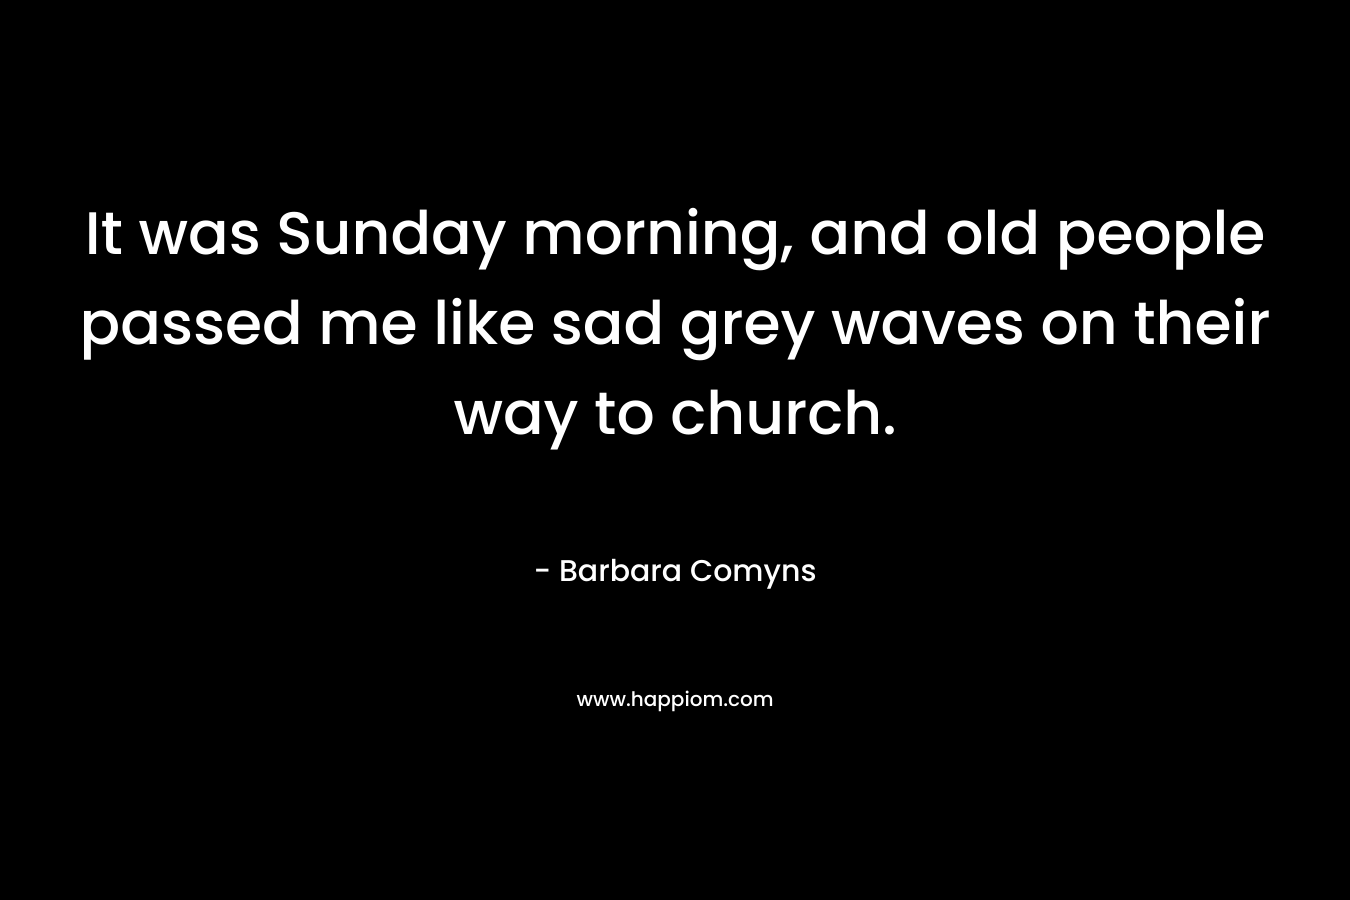 It was Sunday morning, and old people passed me like sad grey waves on their way to church. – Barbara Comyns